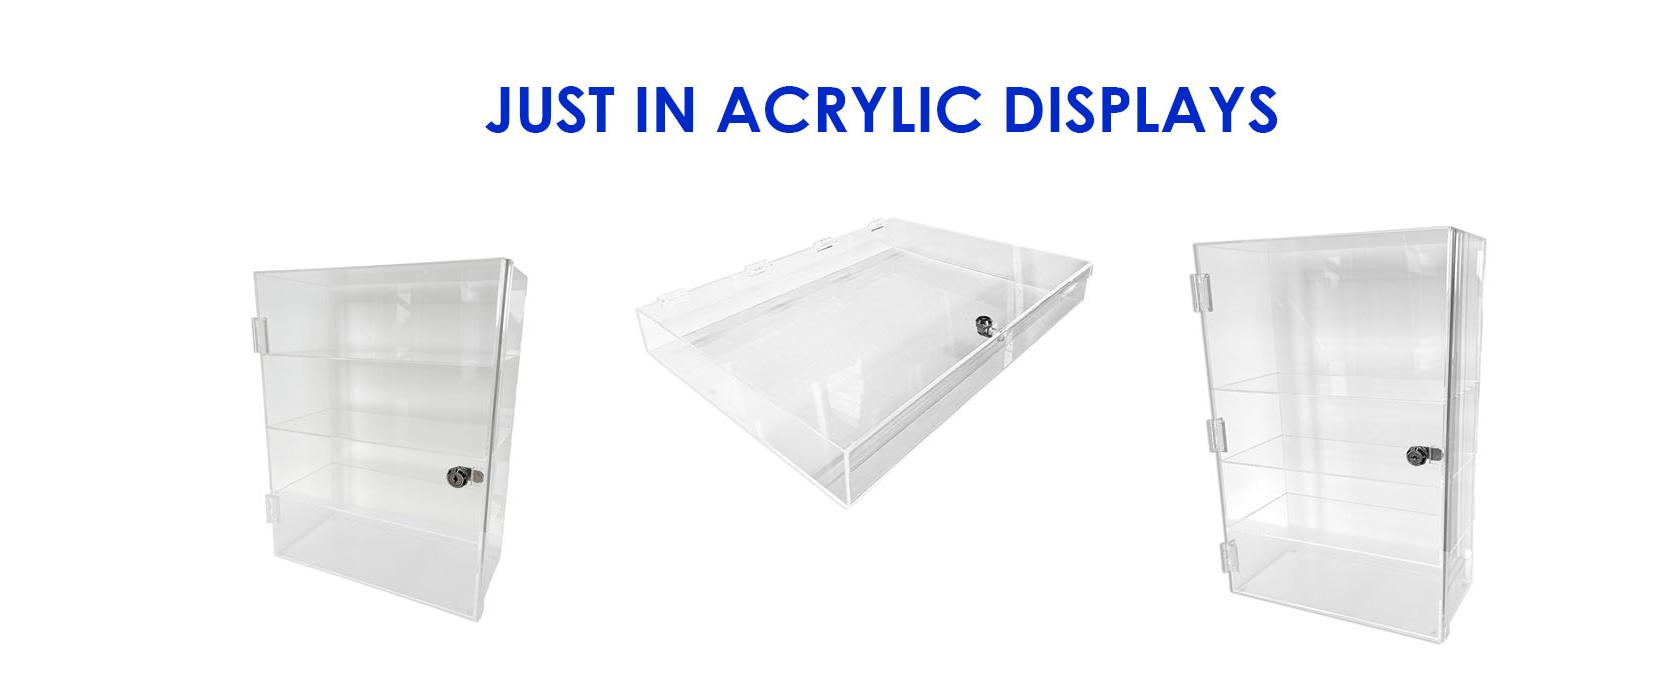 Just In Acrylic Displays